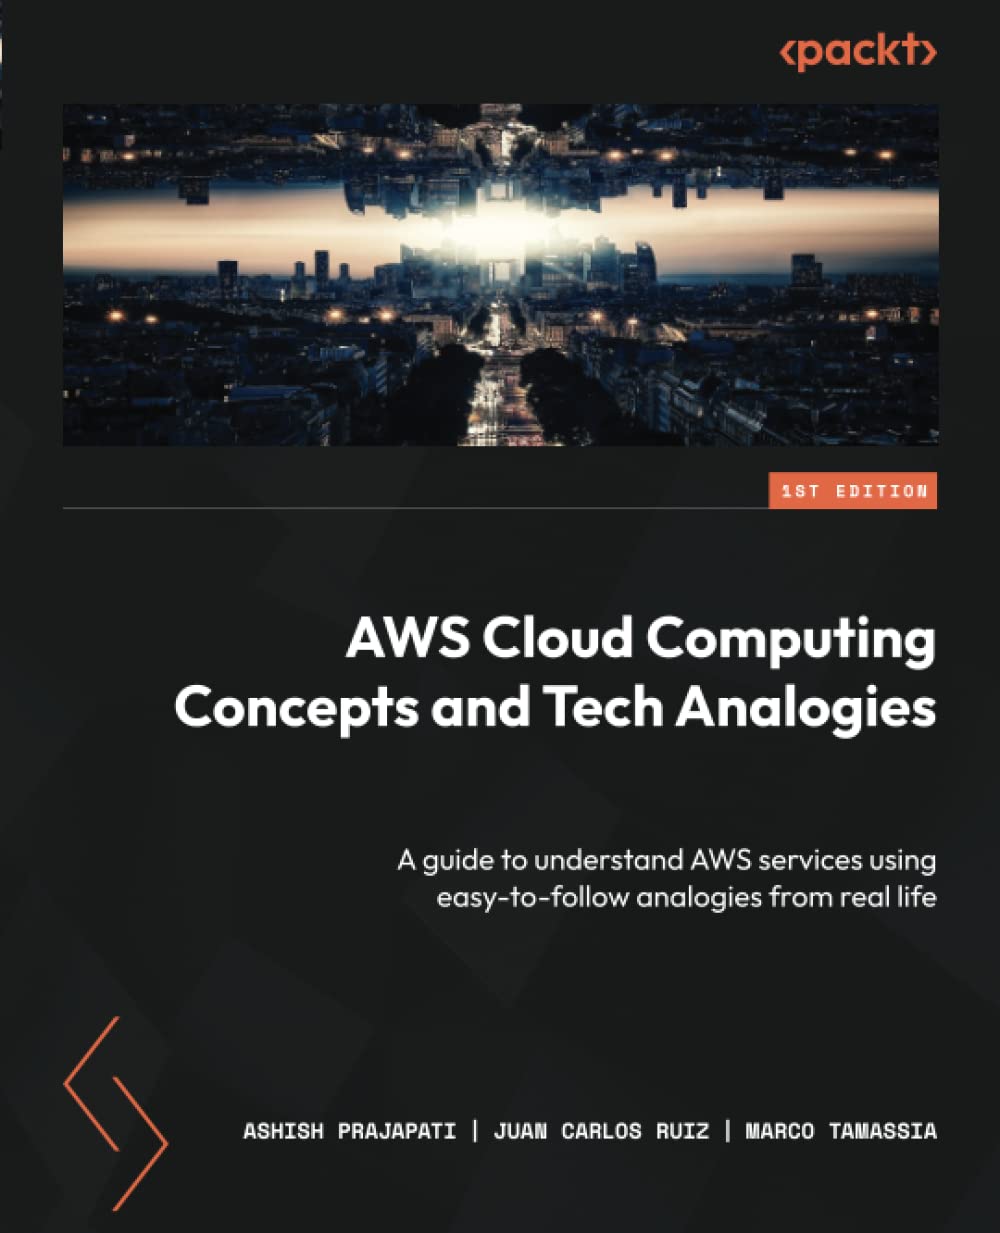 AWS Cloud Computing Concepts and Tech Analogies: A guide to understand AWS services using easy-to-follow analogies from real life